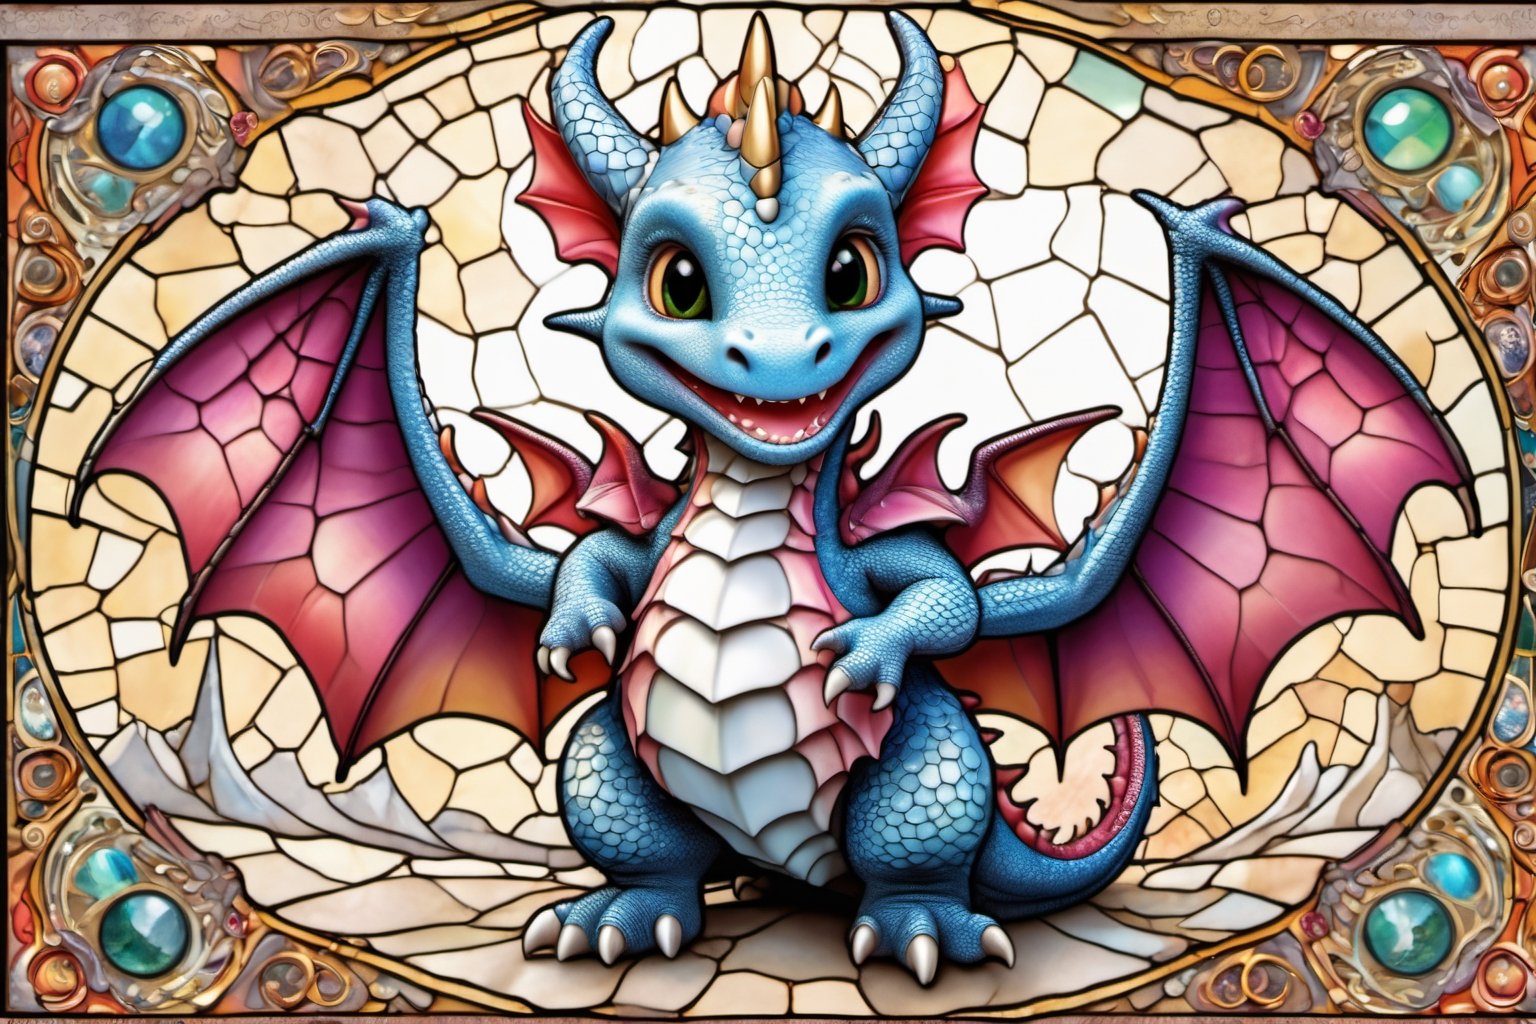 Happy, image of cute dragon,intricate details,
 blessed, welcoming , cute, adorable, vintage, art on a cracked paper, fairytale, patchwork, stained glass, storybook detailed illustration, cinematic, ultra highly detailed, tiny details, beautiful details, mystical, luminism, vibrant colors, complex background,,cute dragon